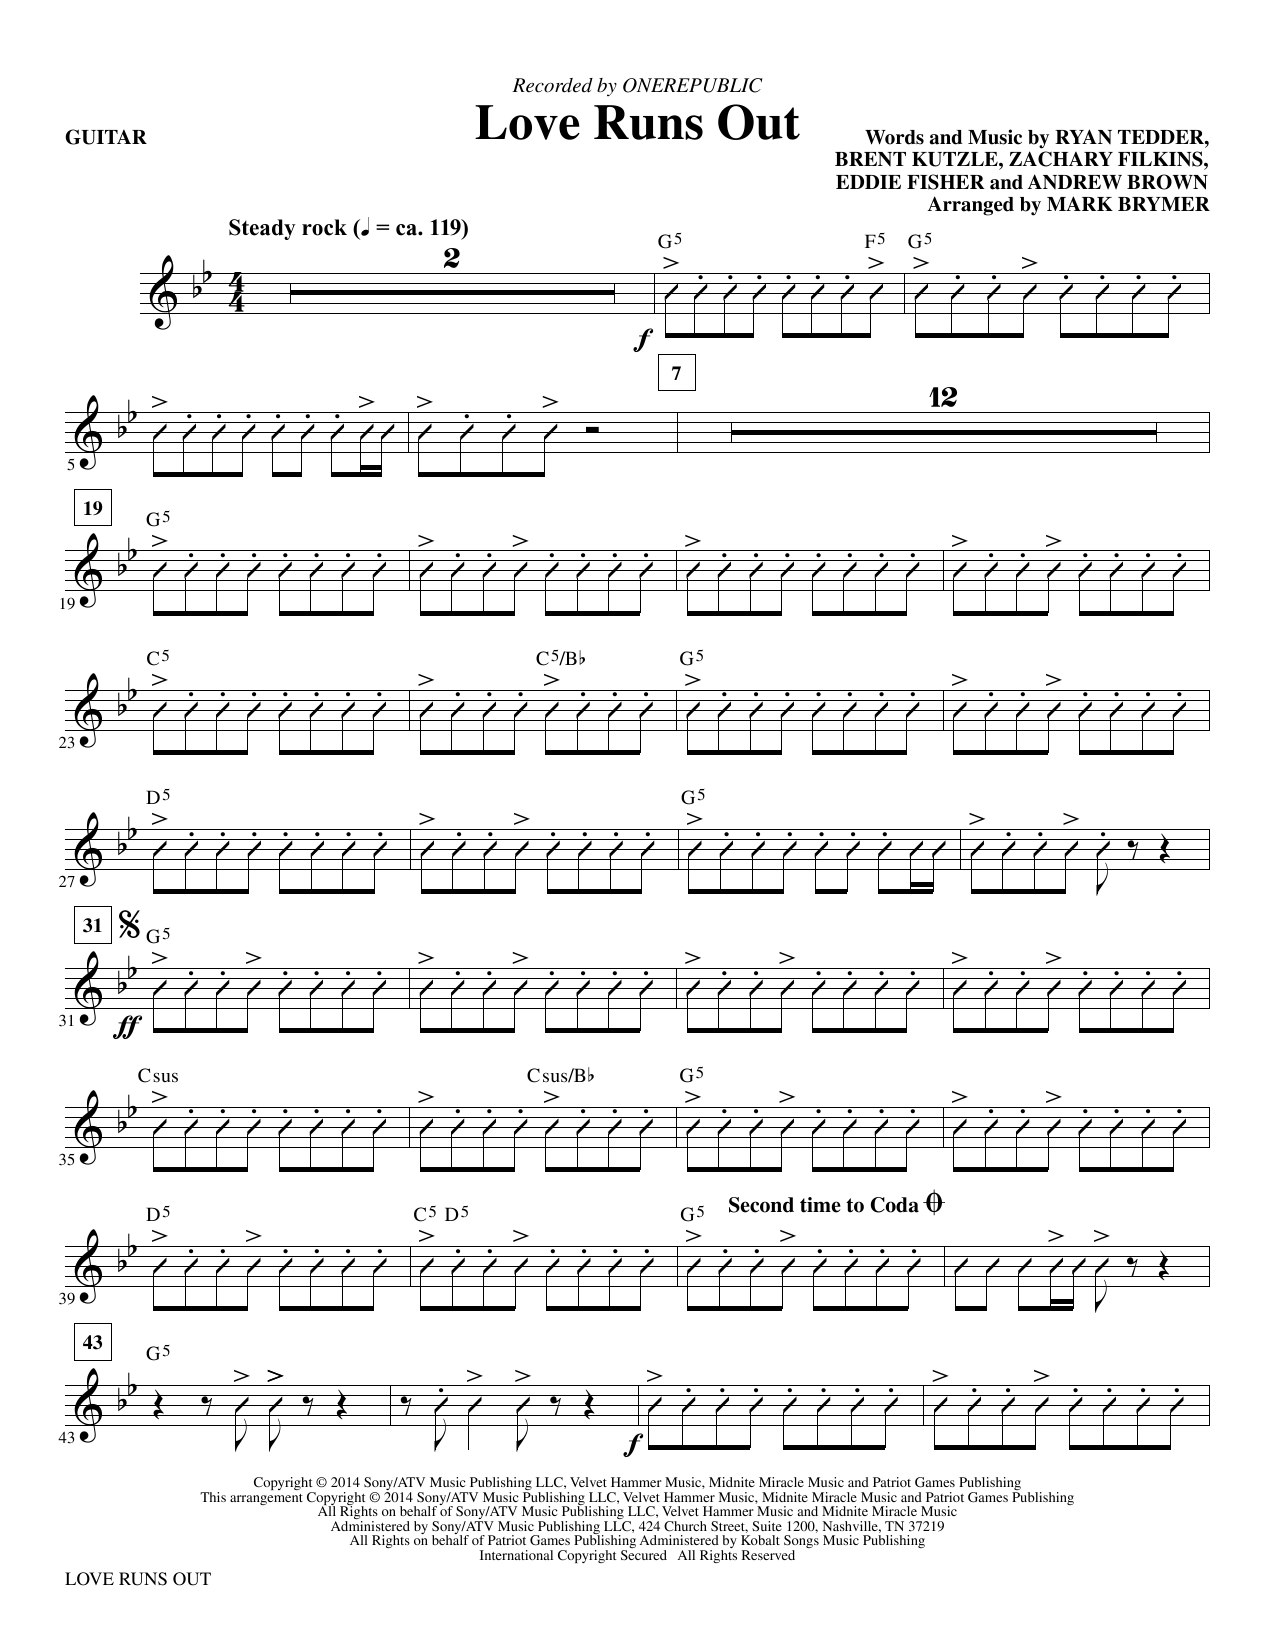 Mark Brymer Love Runs Out - Guitar sheet music notes and chords. Download Printable PDF.